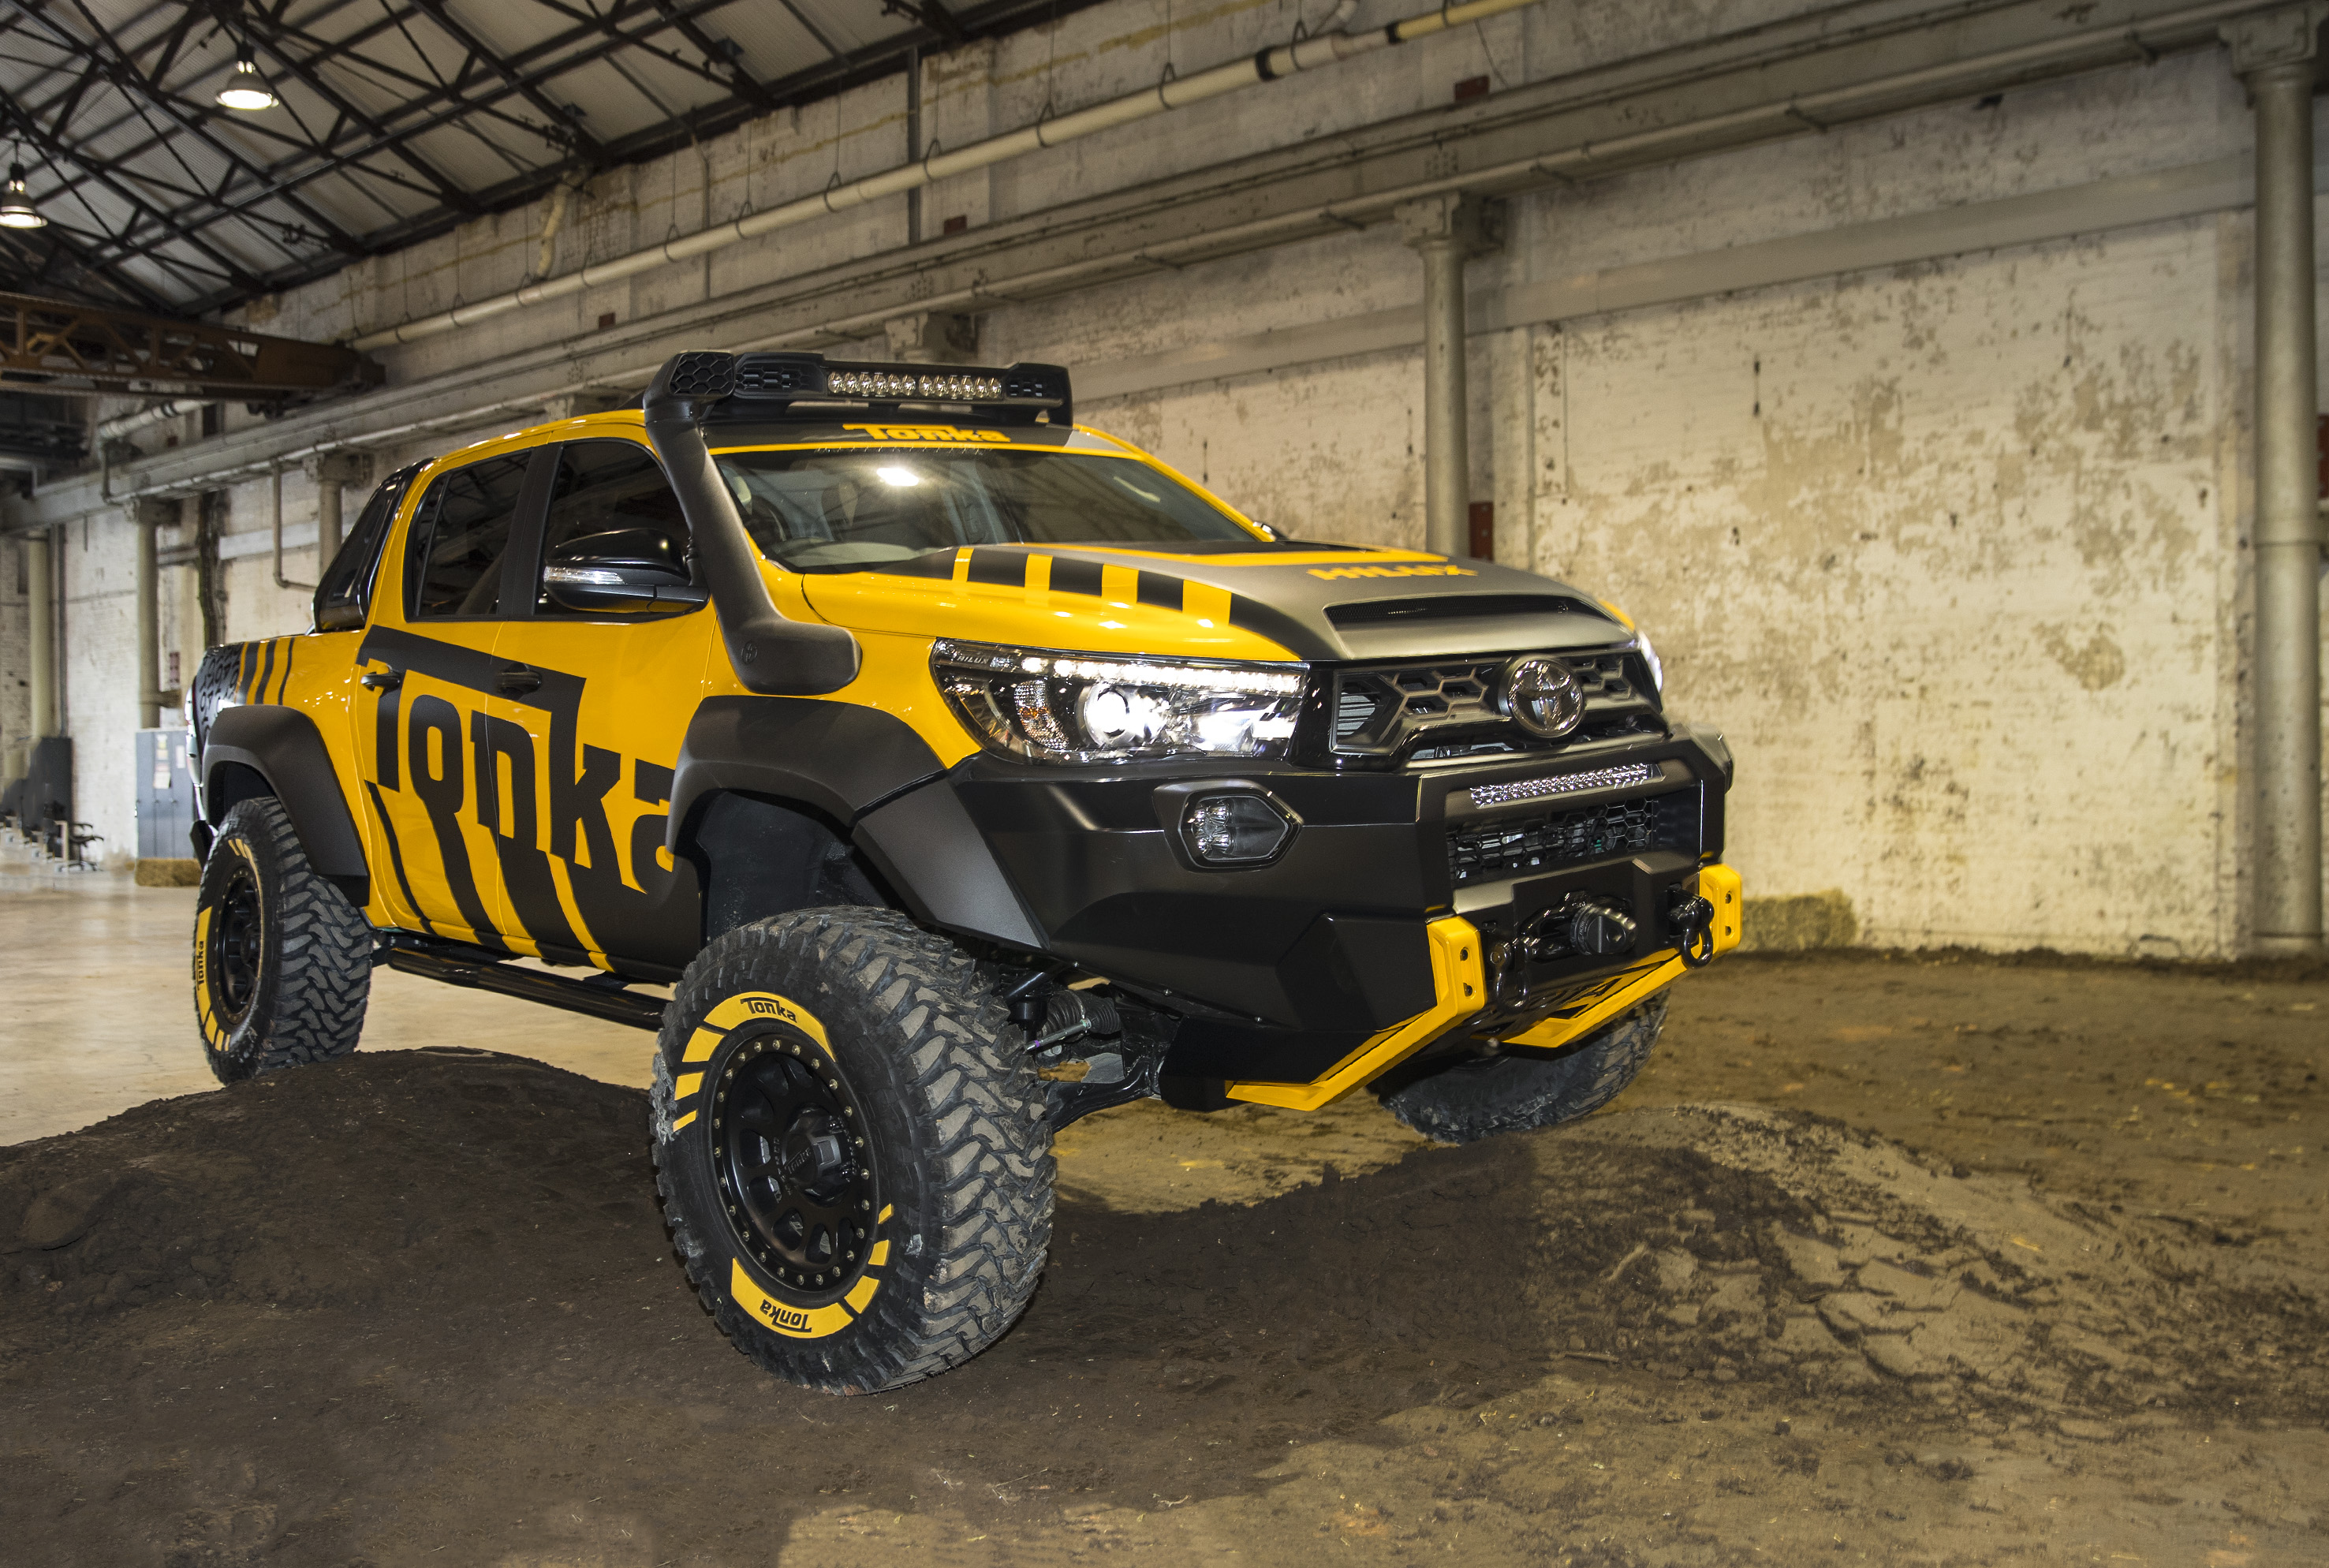 Playtime in the Toyota HiLux Tonka concept and 2022 Toyota 